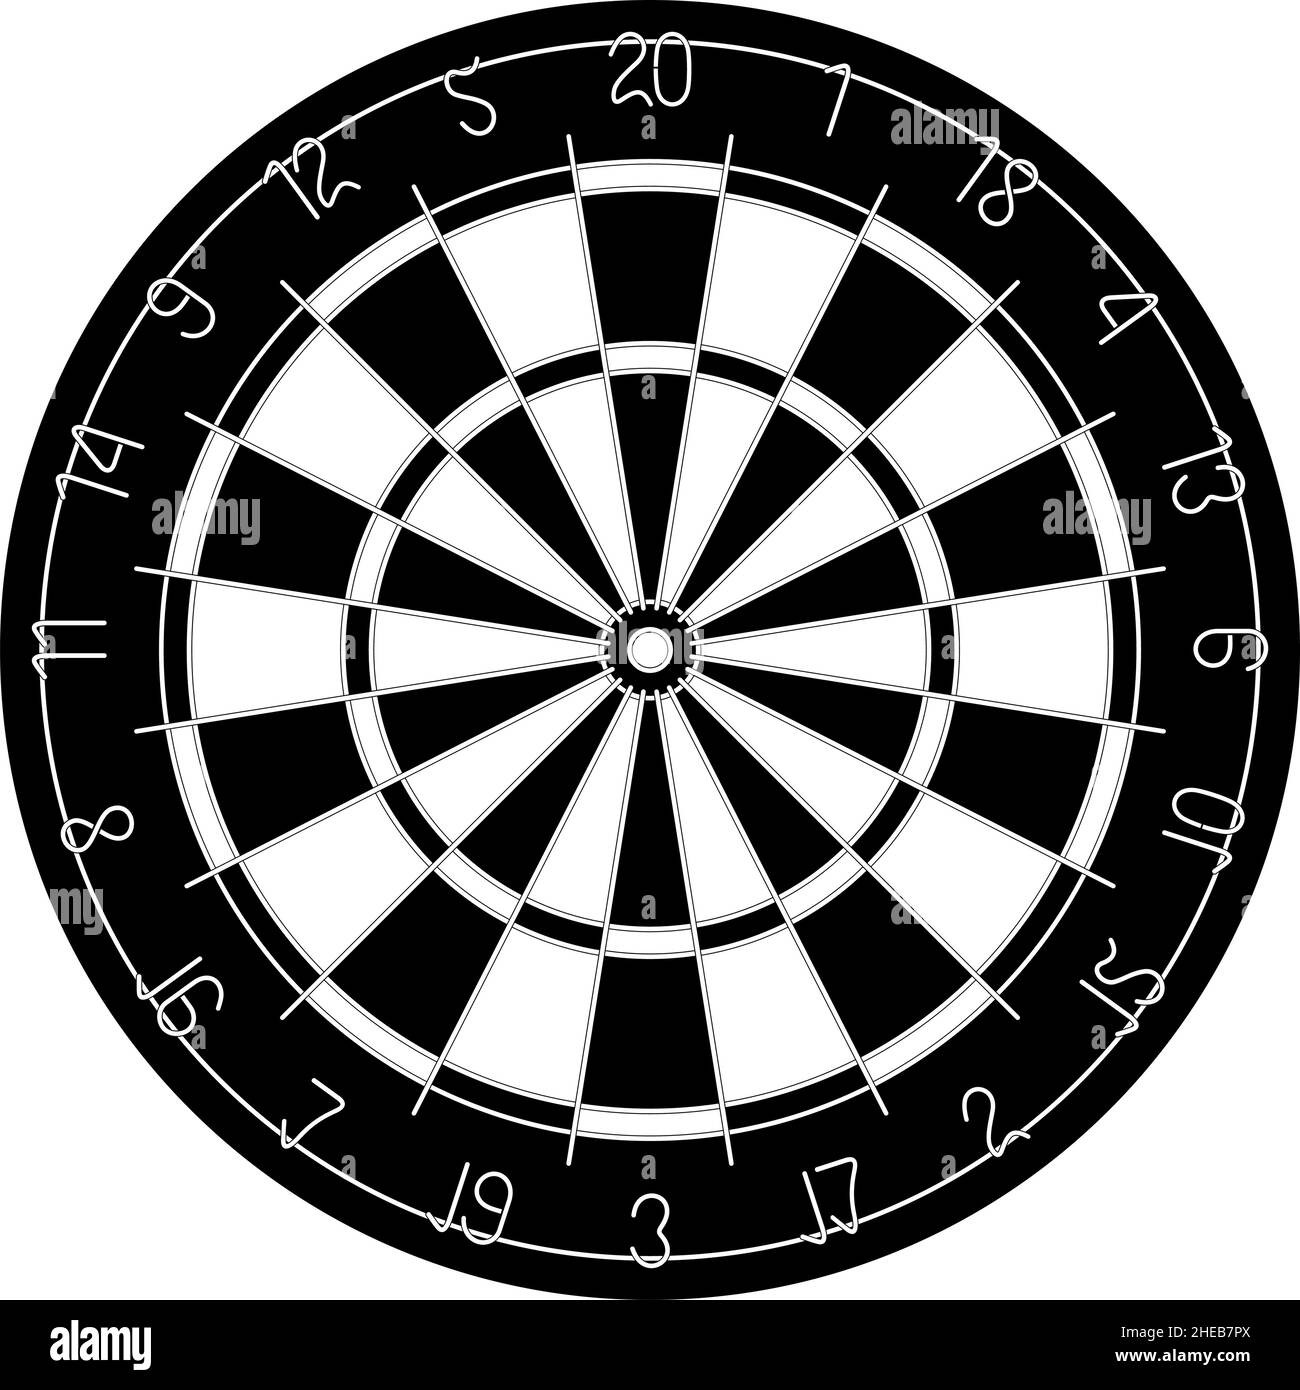 Slette Mose Forføre Dart board darts Black and White Stock Photos & Images - Alamy